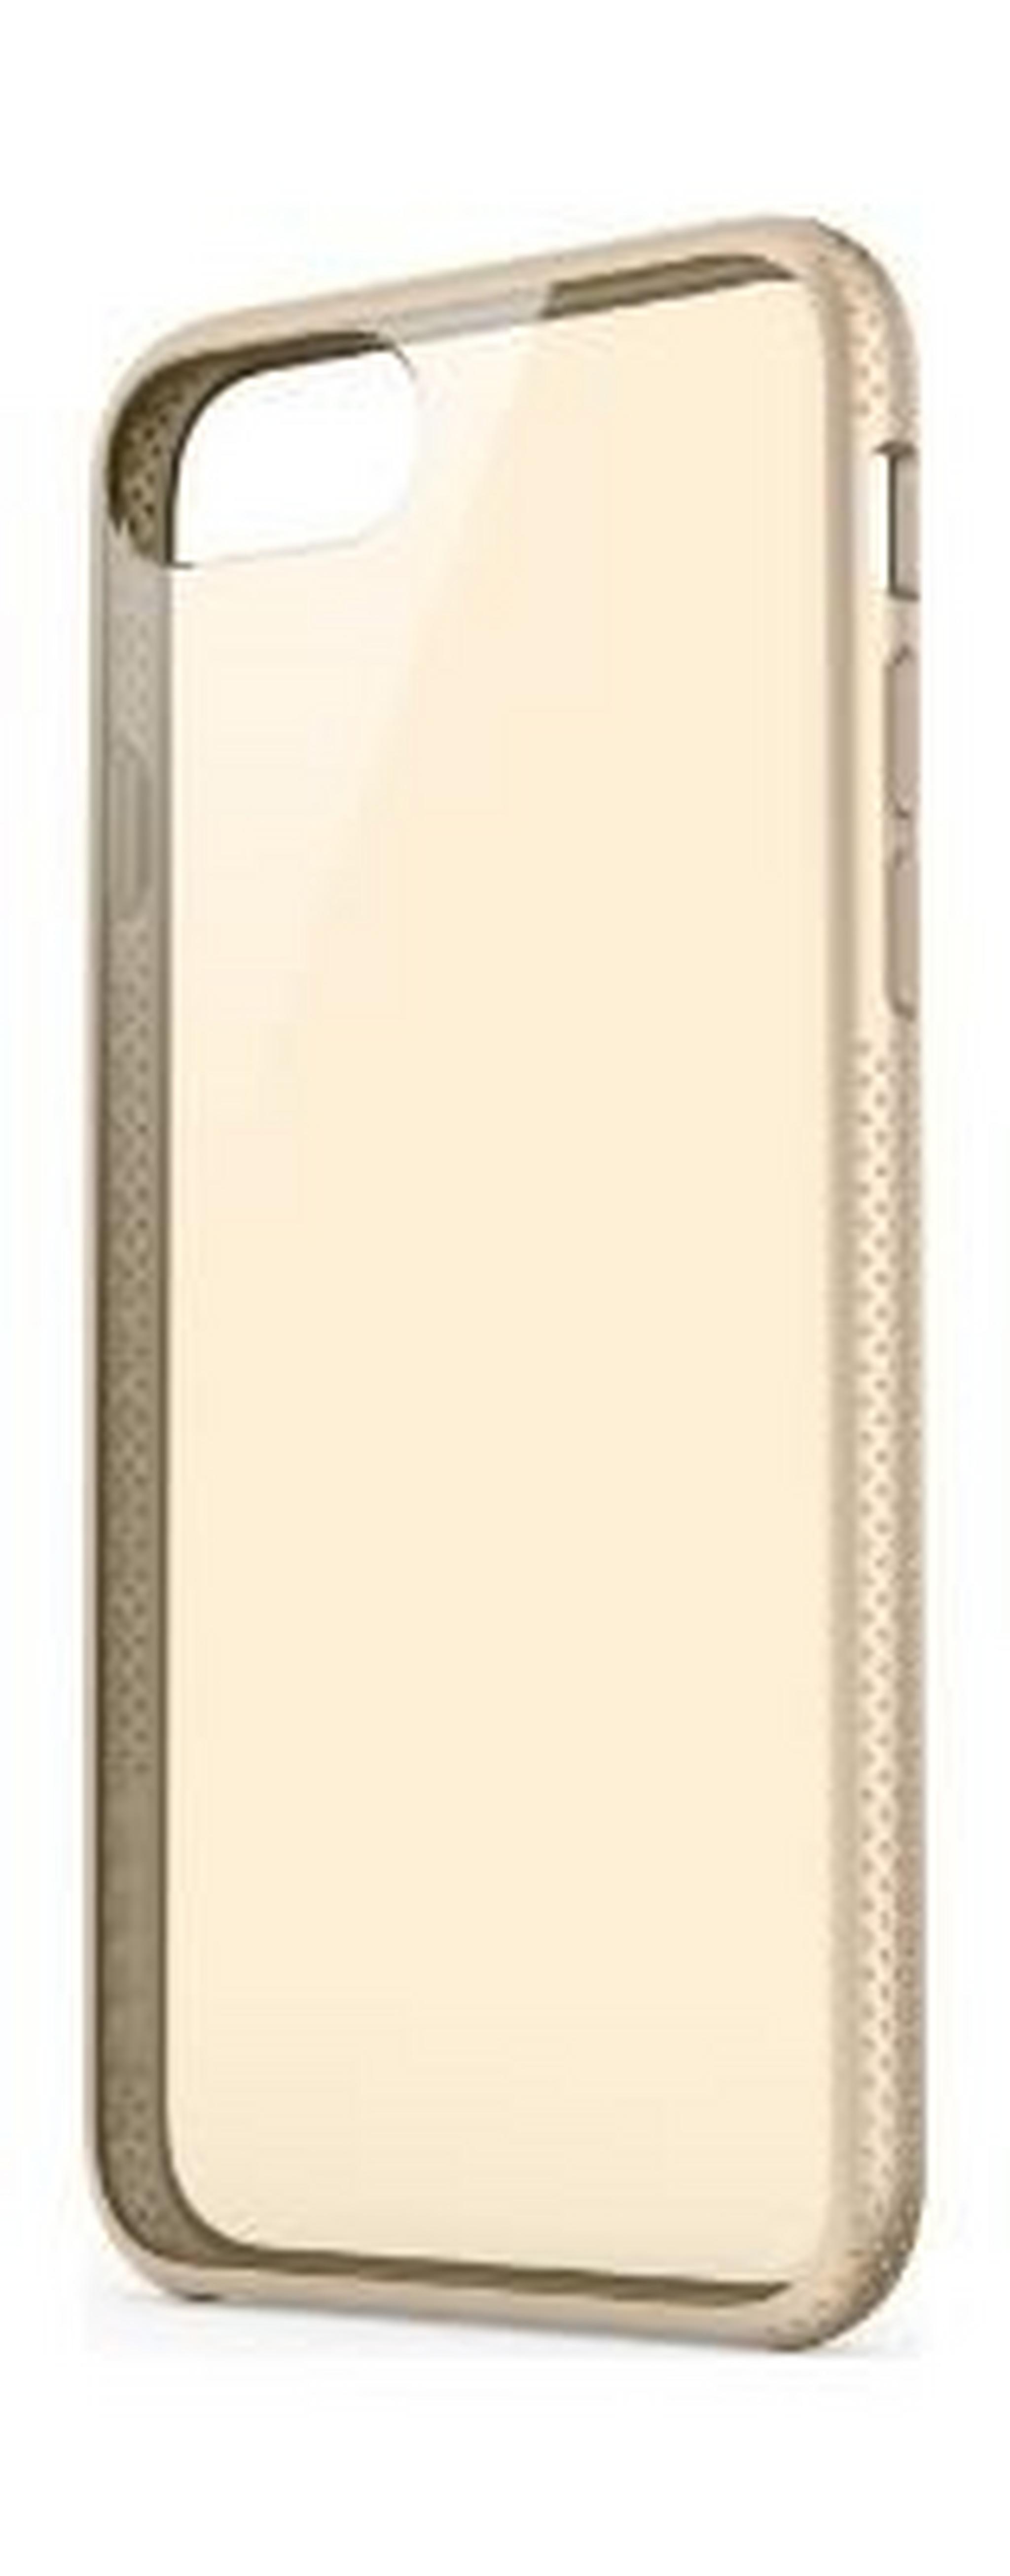 Belkin Air Protect SheerForce Case For iPhone 7 (F8W808btC02) - Gold